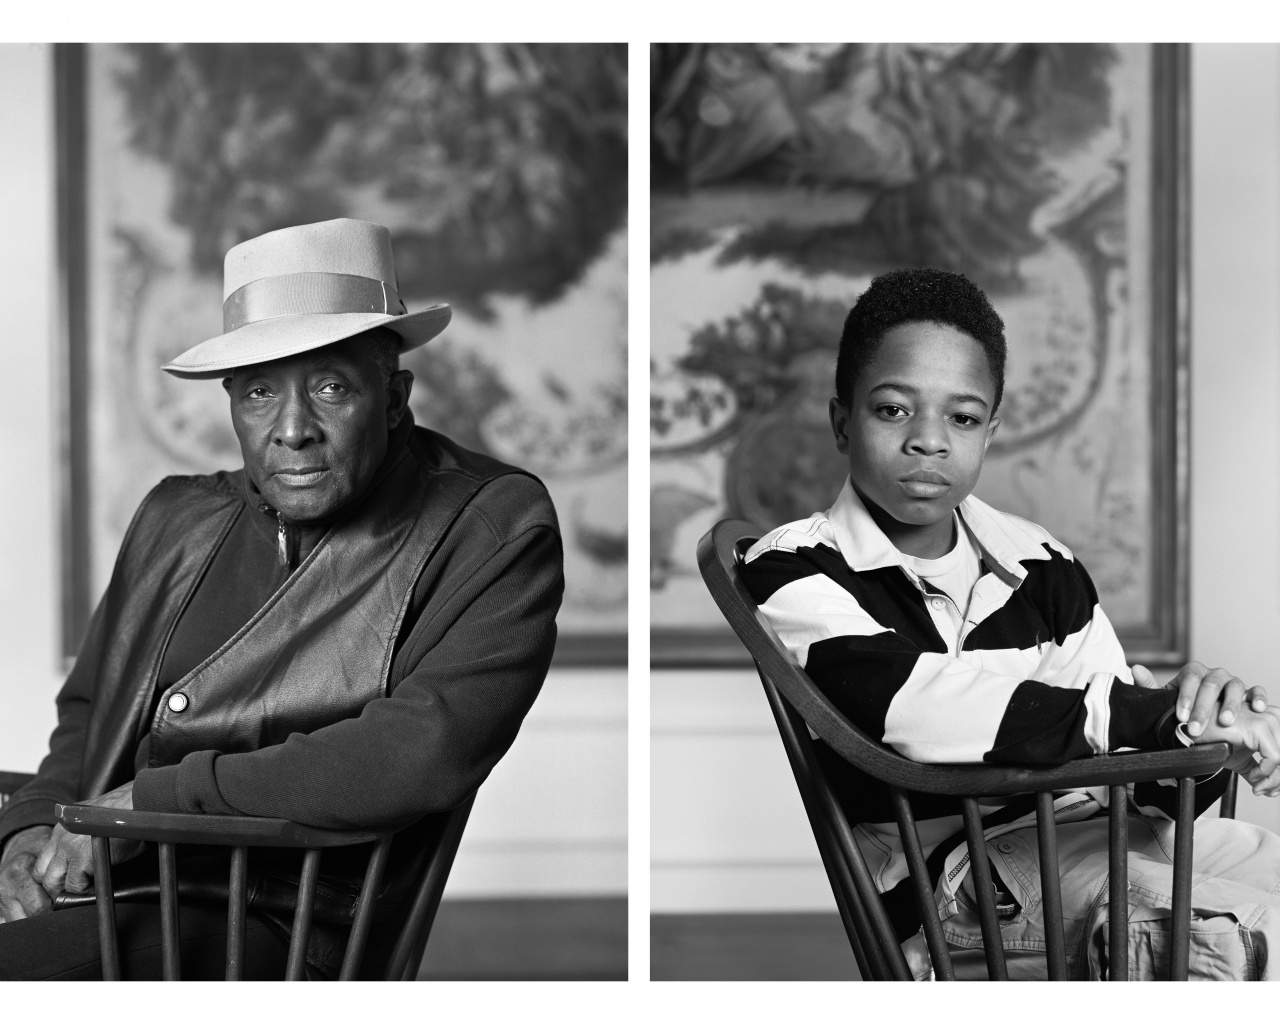 In New York, Okwui Enwezor's posthumous exhibition: a project on the pain of America's blacks